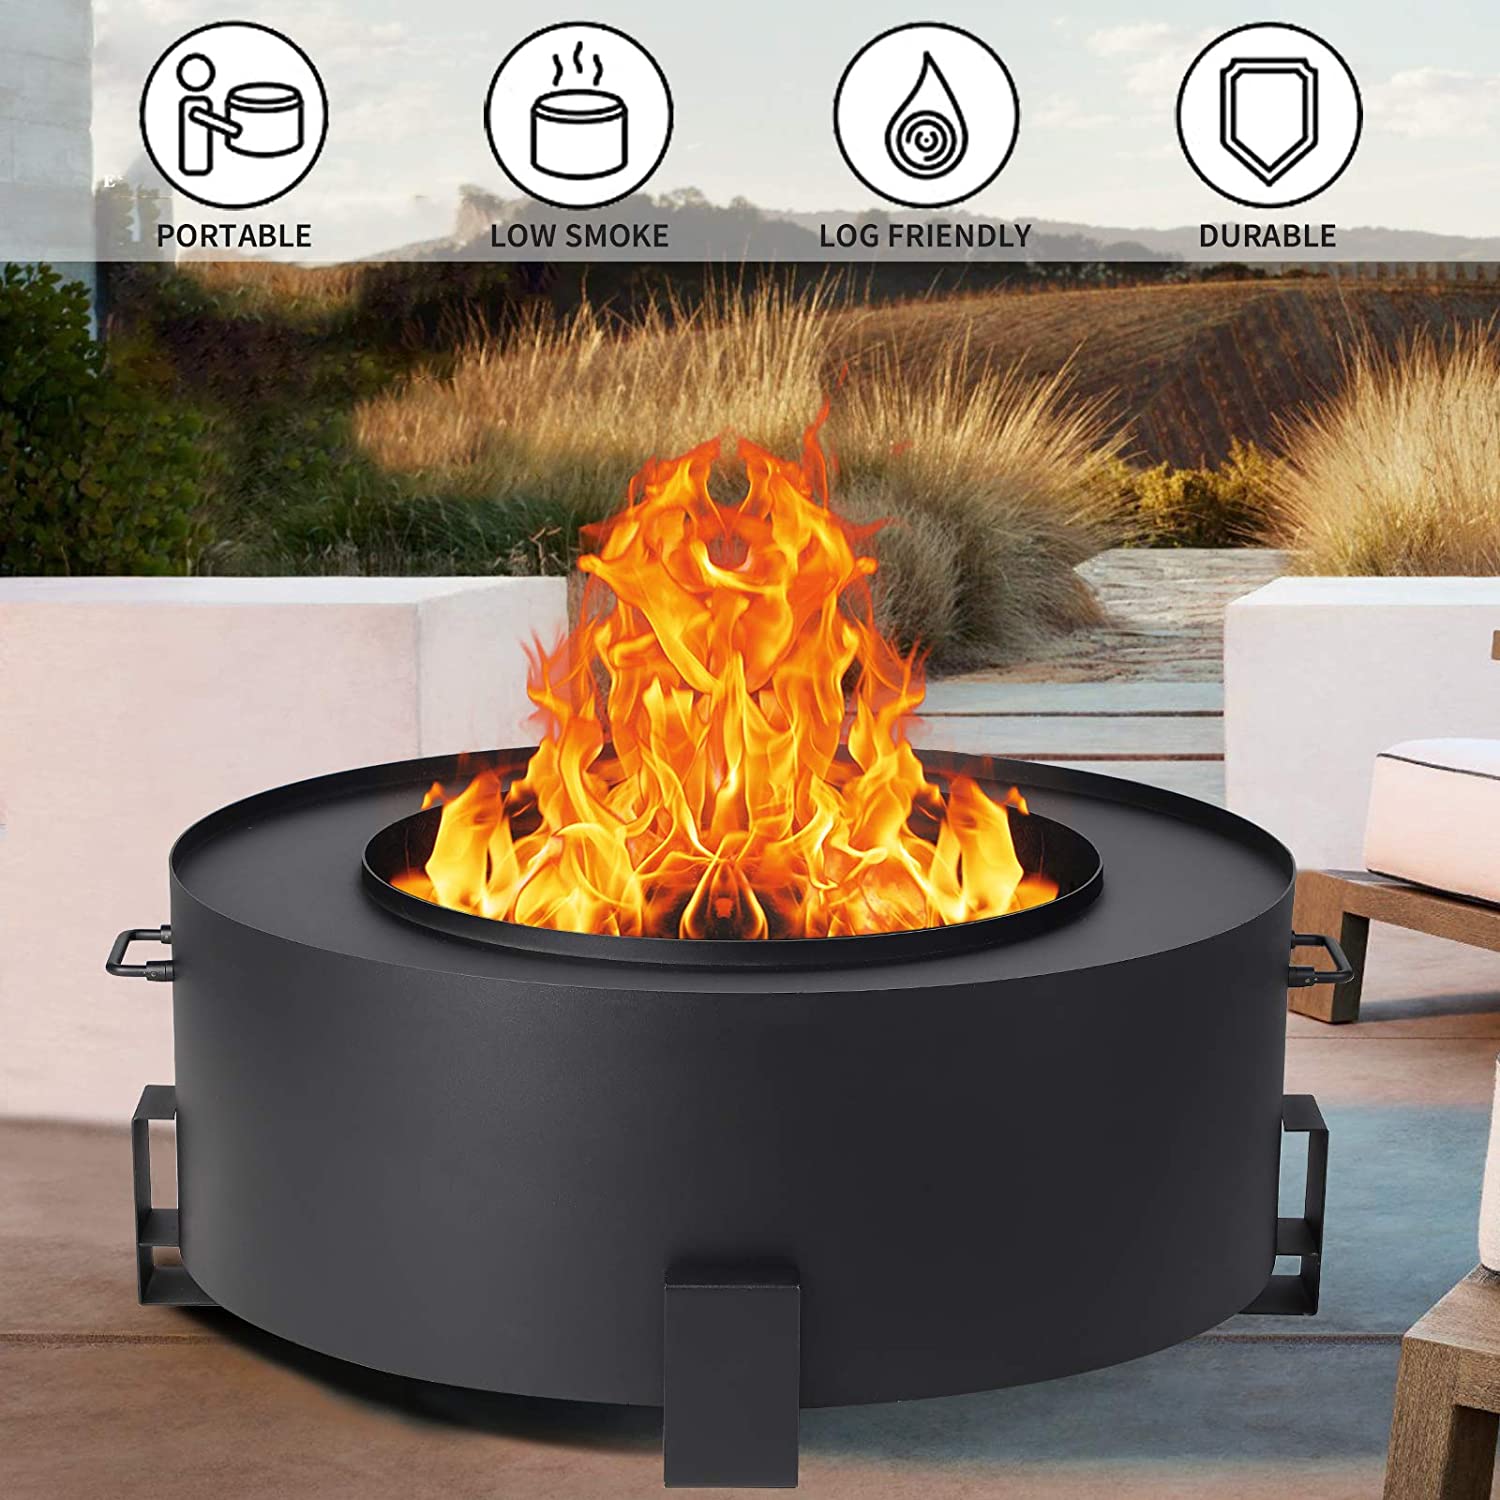 Wholesale GIODIR Smokeless Fire Pit Outdoor Wood Burning, 32 Inch Steel ...